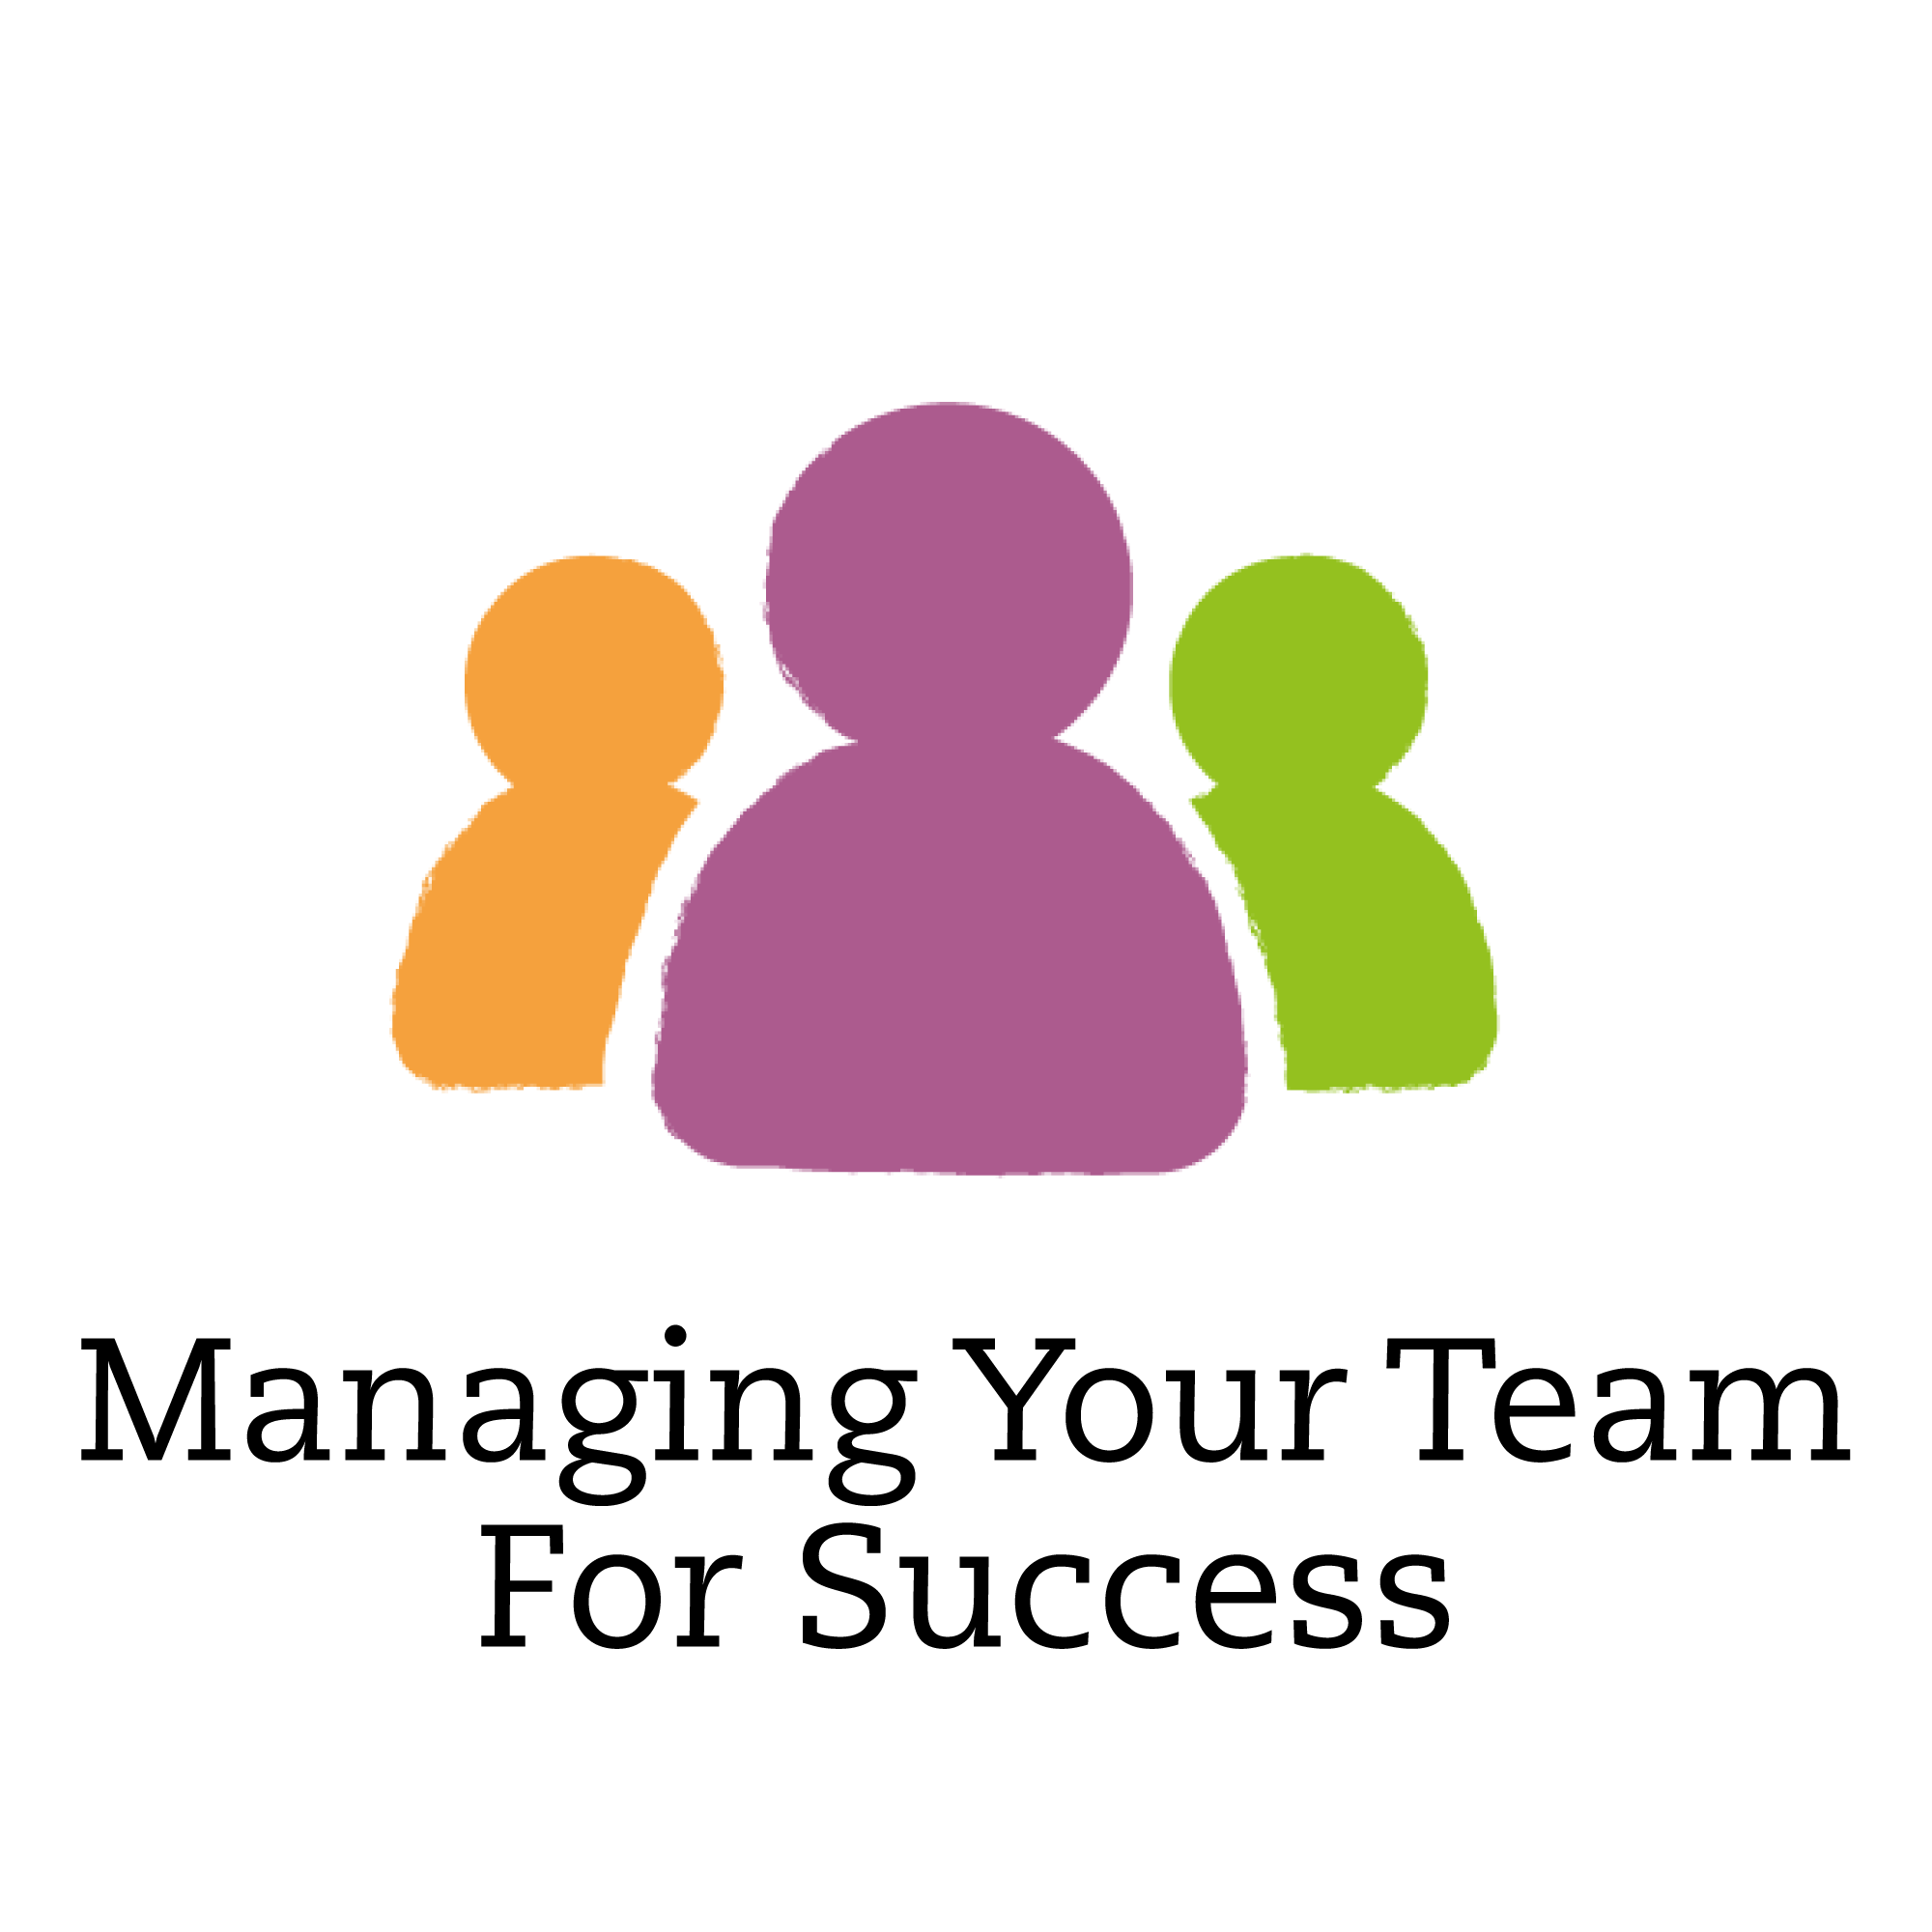 Remote, face-to-face or hybrid service teams – managing your team for success through change (14 Apr)